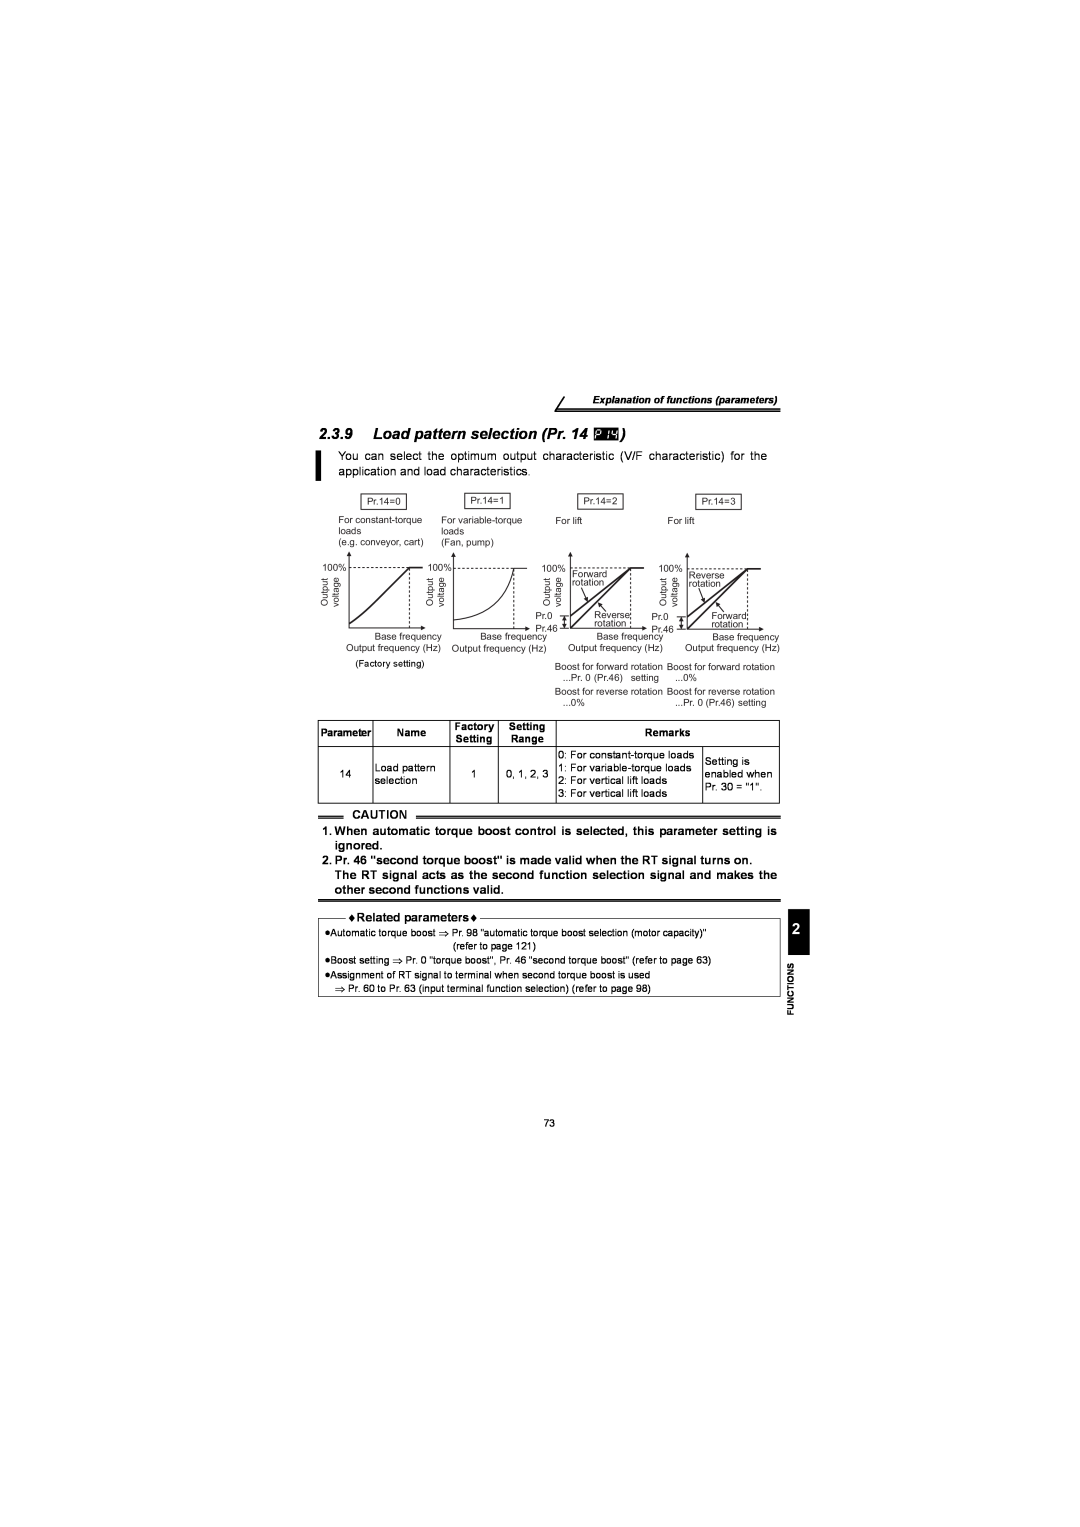 Mitsubishi Electronics FR-S500 instruction manual Load pattern selection Pr, 100%, Base frequency Output frequency Hz 